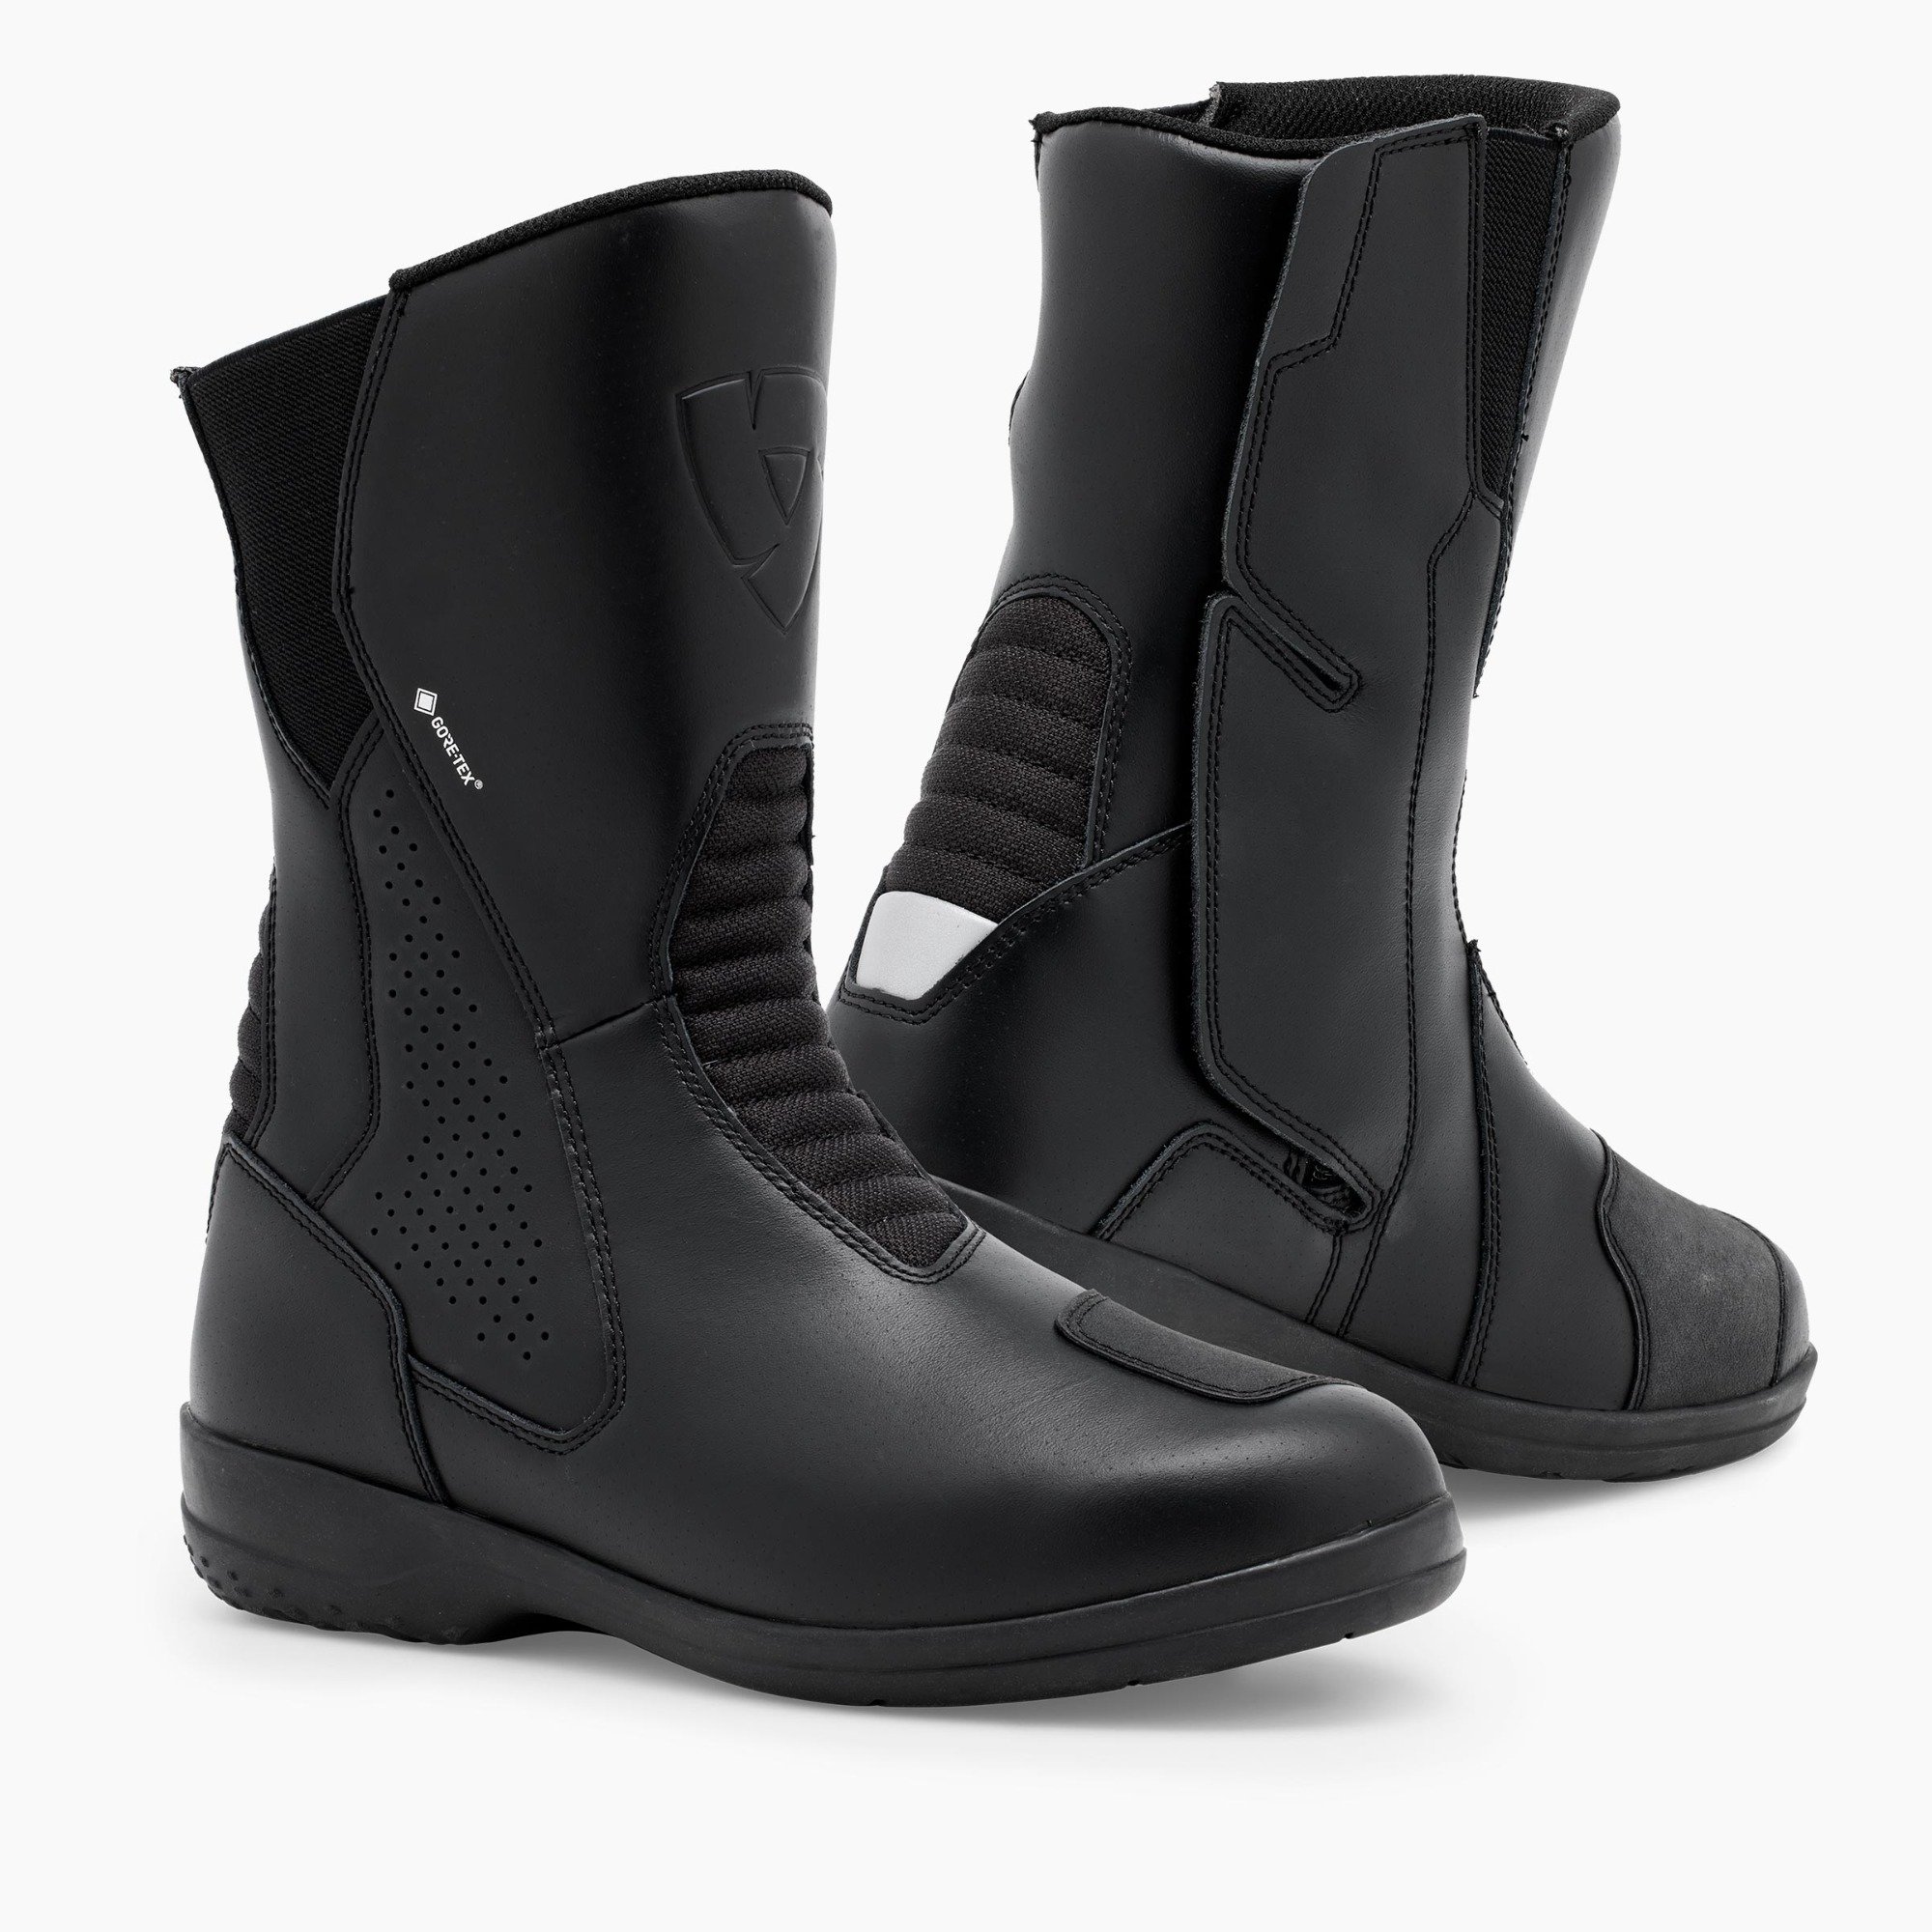 Image of REV'IT! Arena GTX Boots Lady Black Size 41 ID 8700001357012